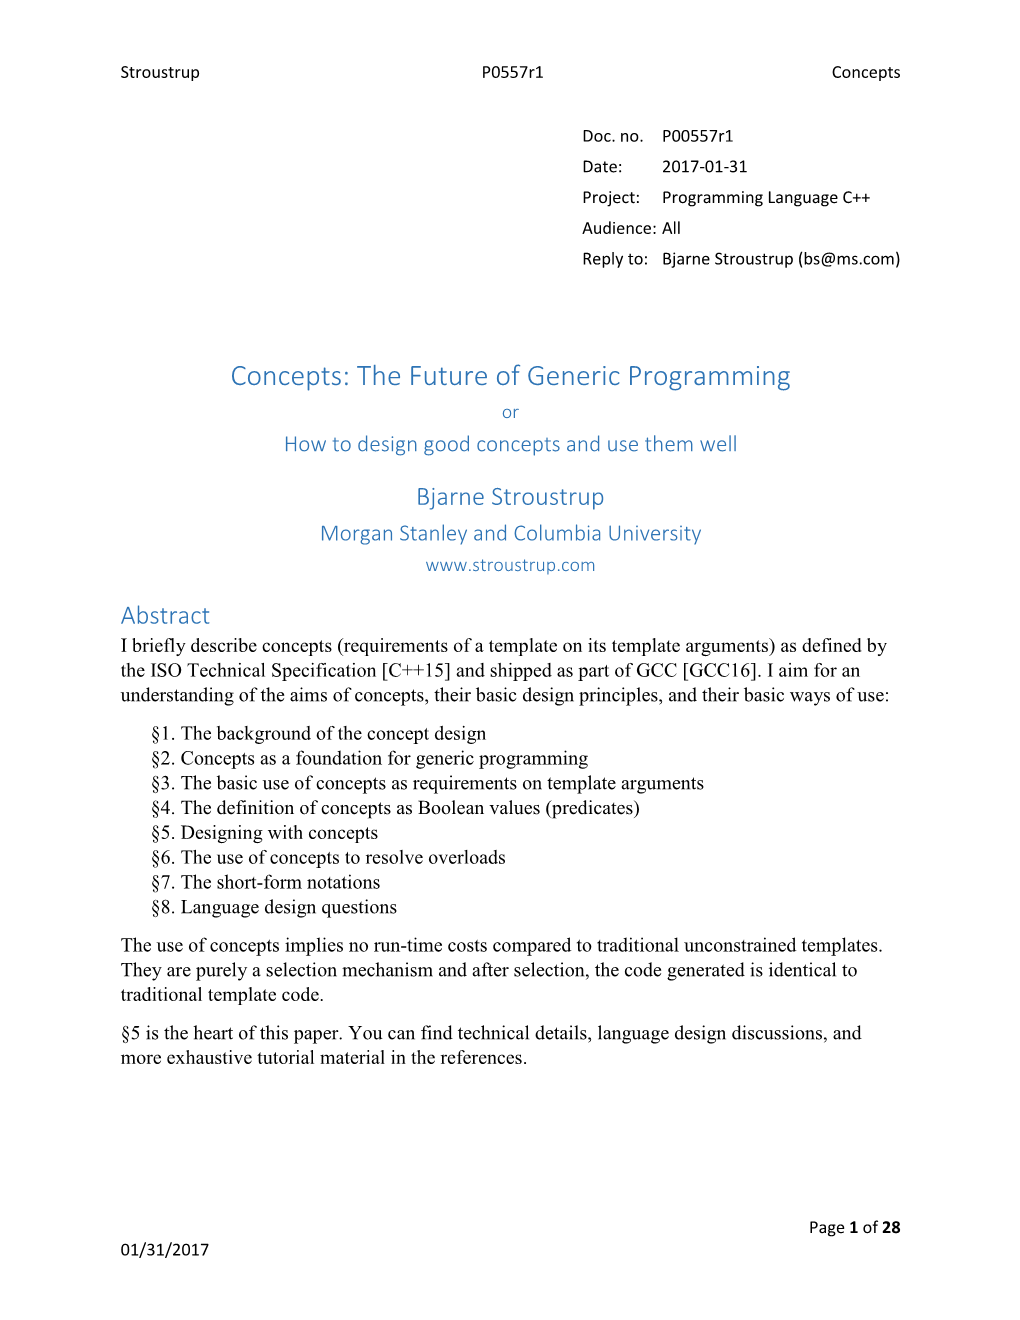 The Future of Generic Programming Or How to Design Good Concepts and Use Them Well